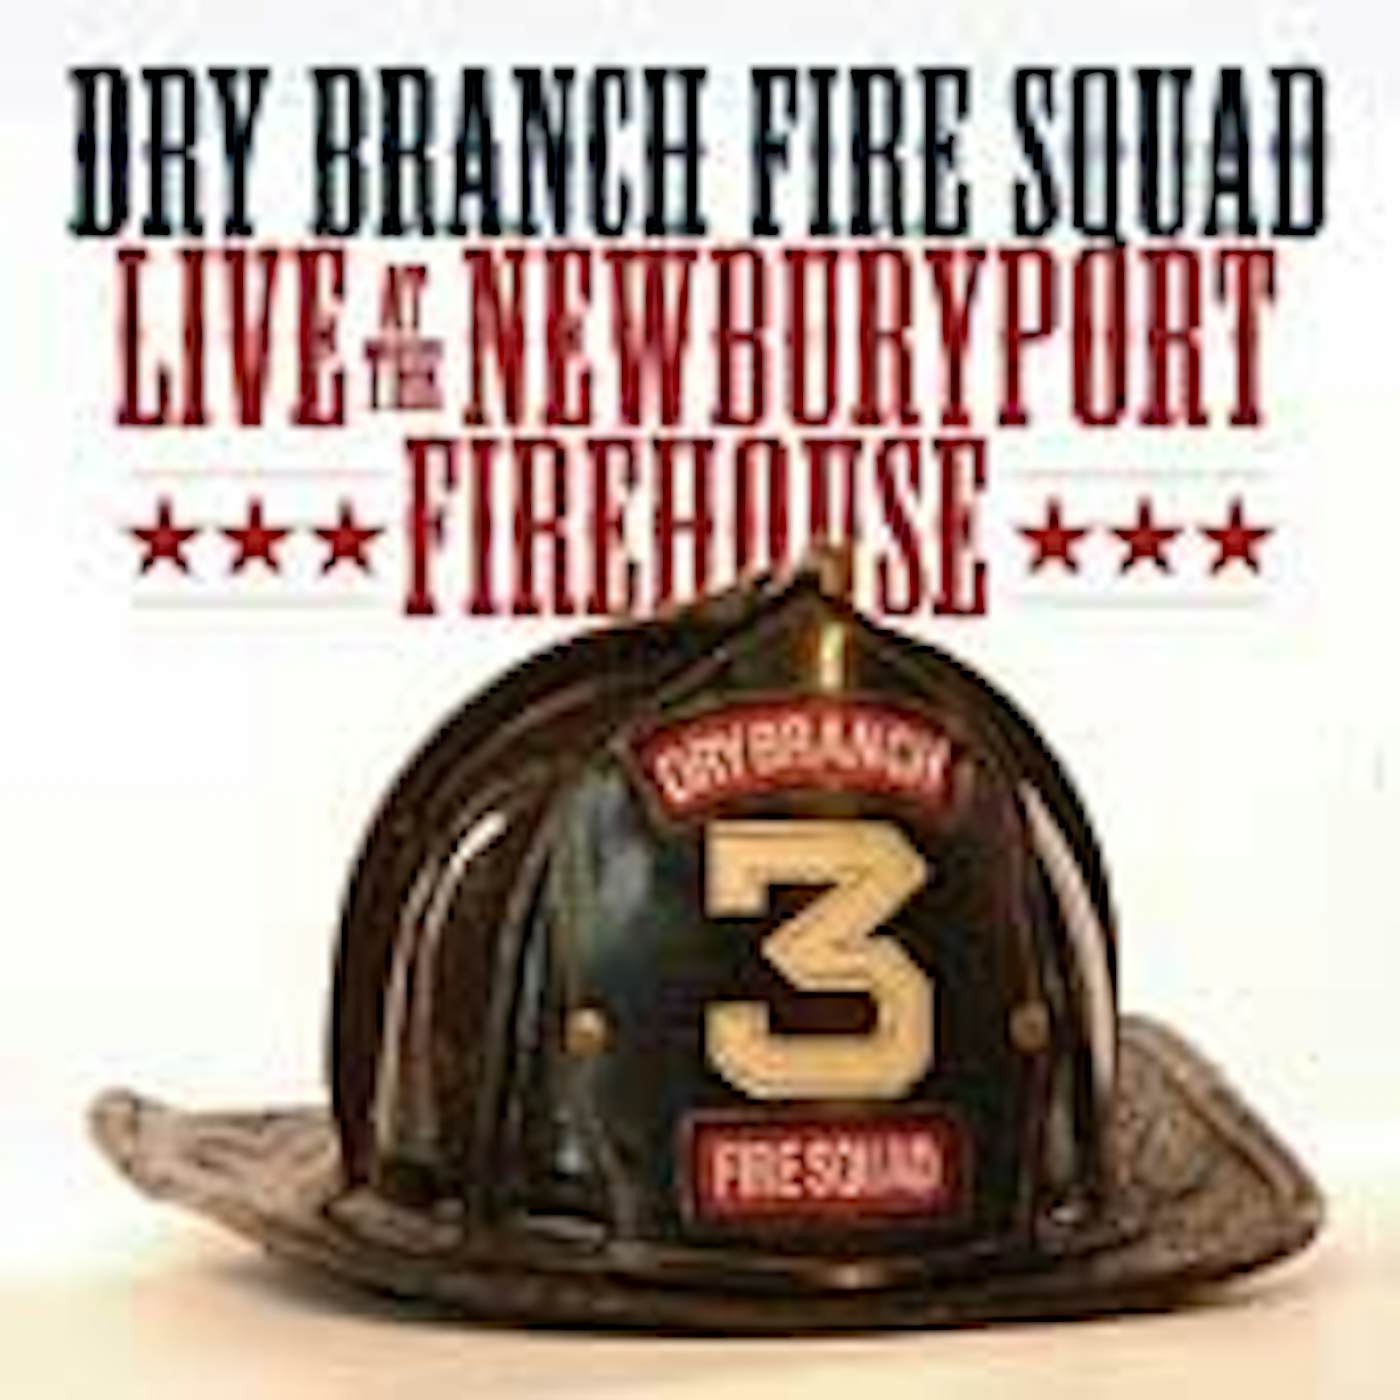 Dry Branch Fire Squad LIVE AT THE NEWBURYPORT FIREHOUSE CD